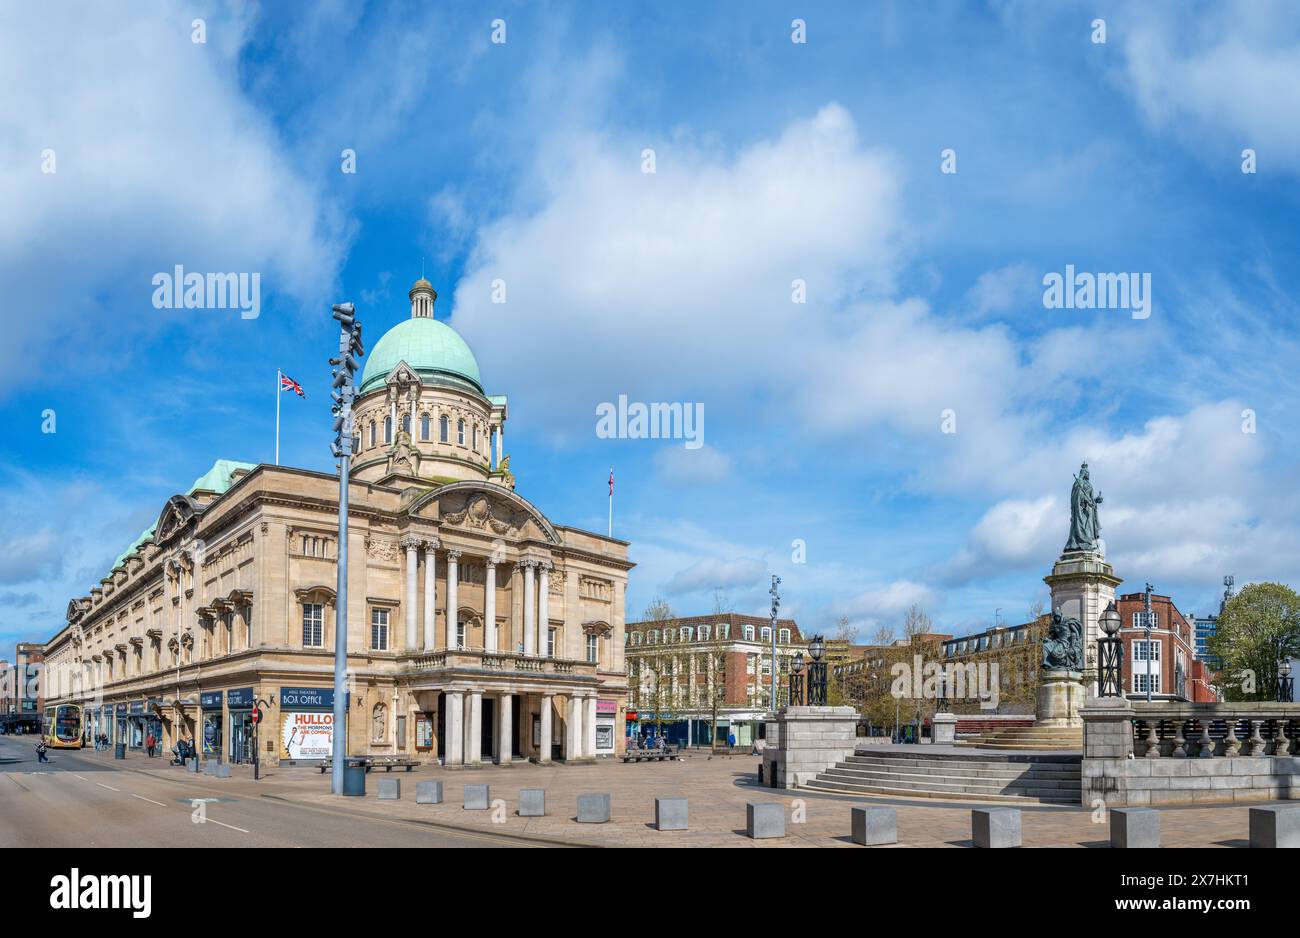 City Hall in Queen Victoria Square, Kingston upon Hull, Yorkshire, England, UK Stock Photo